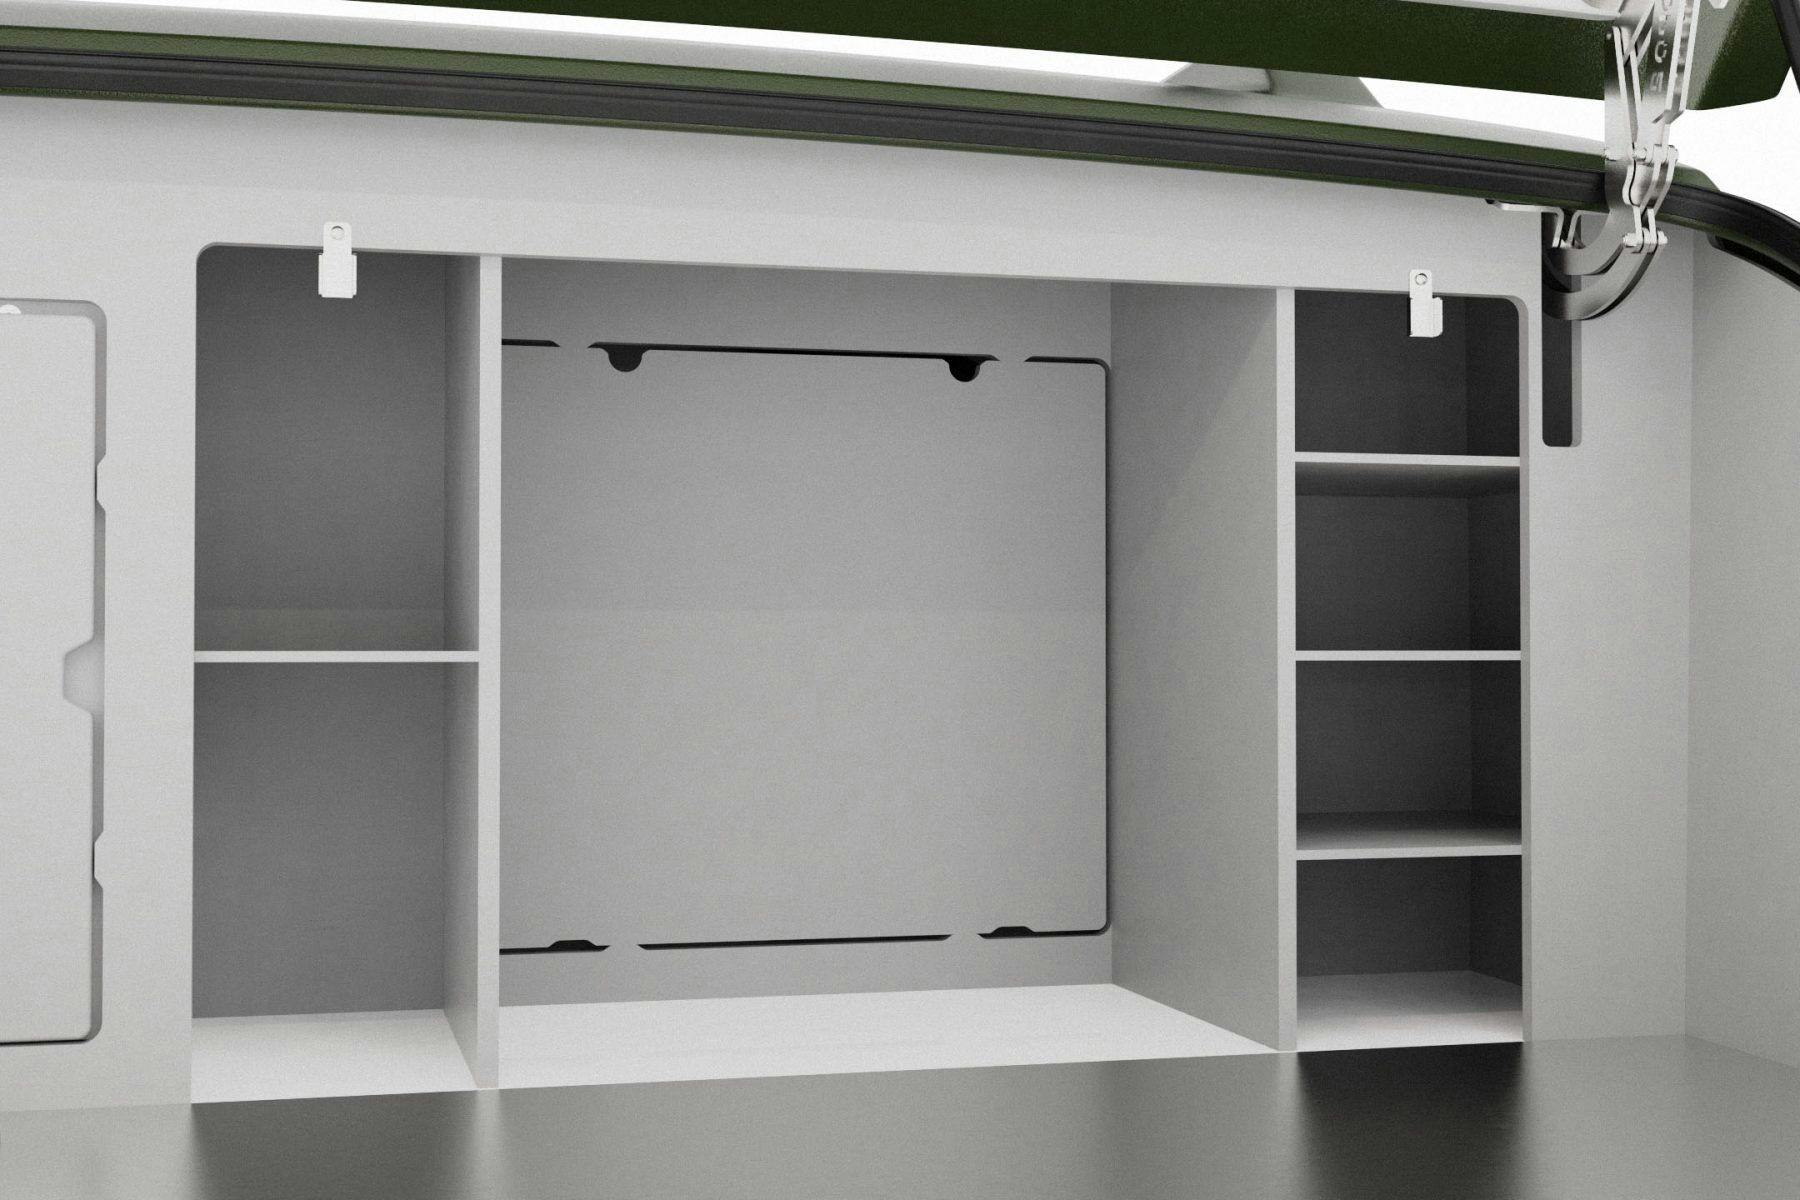 Rendering of the access panel to the utilities closet in the galley of the TOPO2, a teardrop trailer.